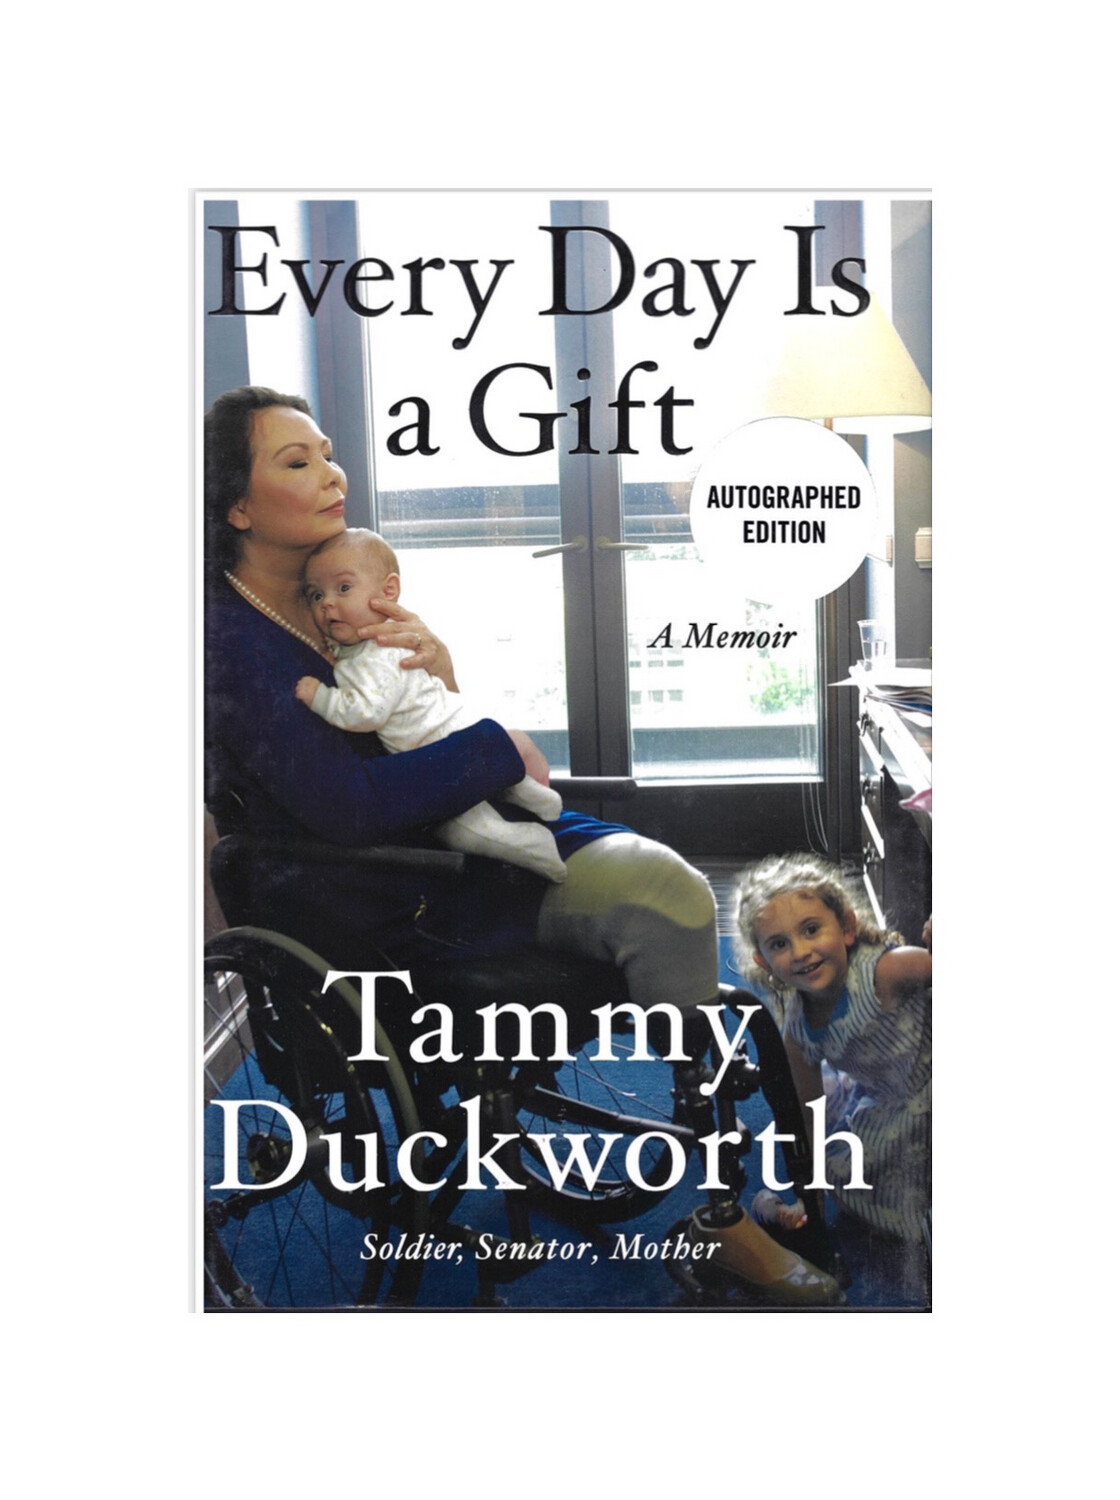 Every Day is a Gift by Tammy Duckworth